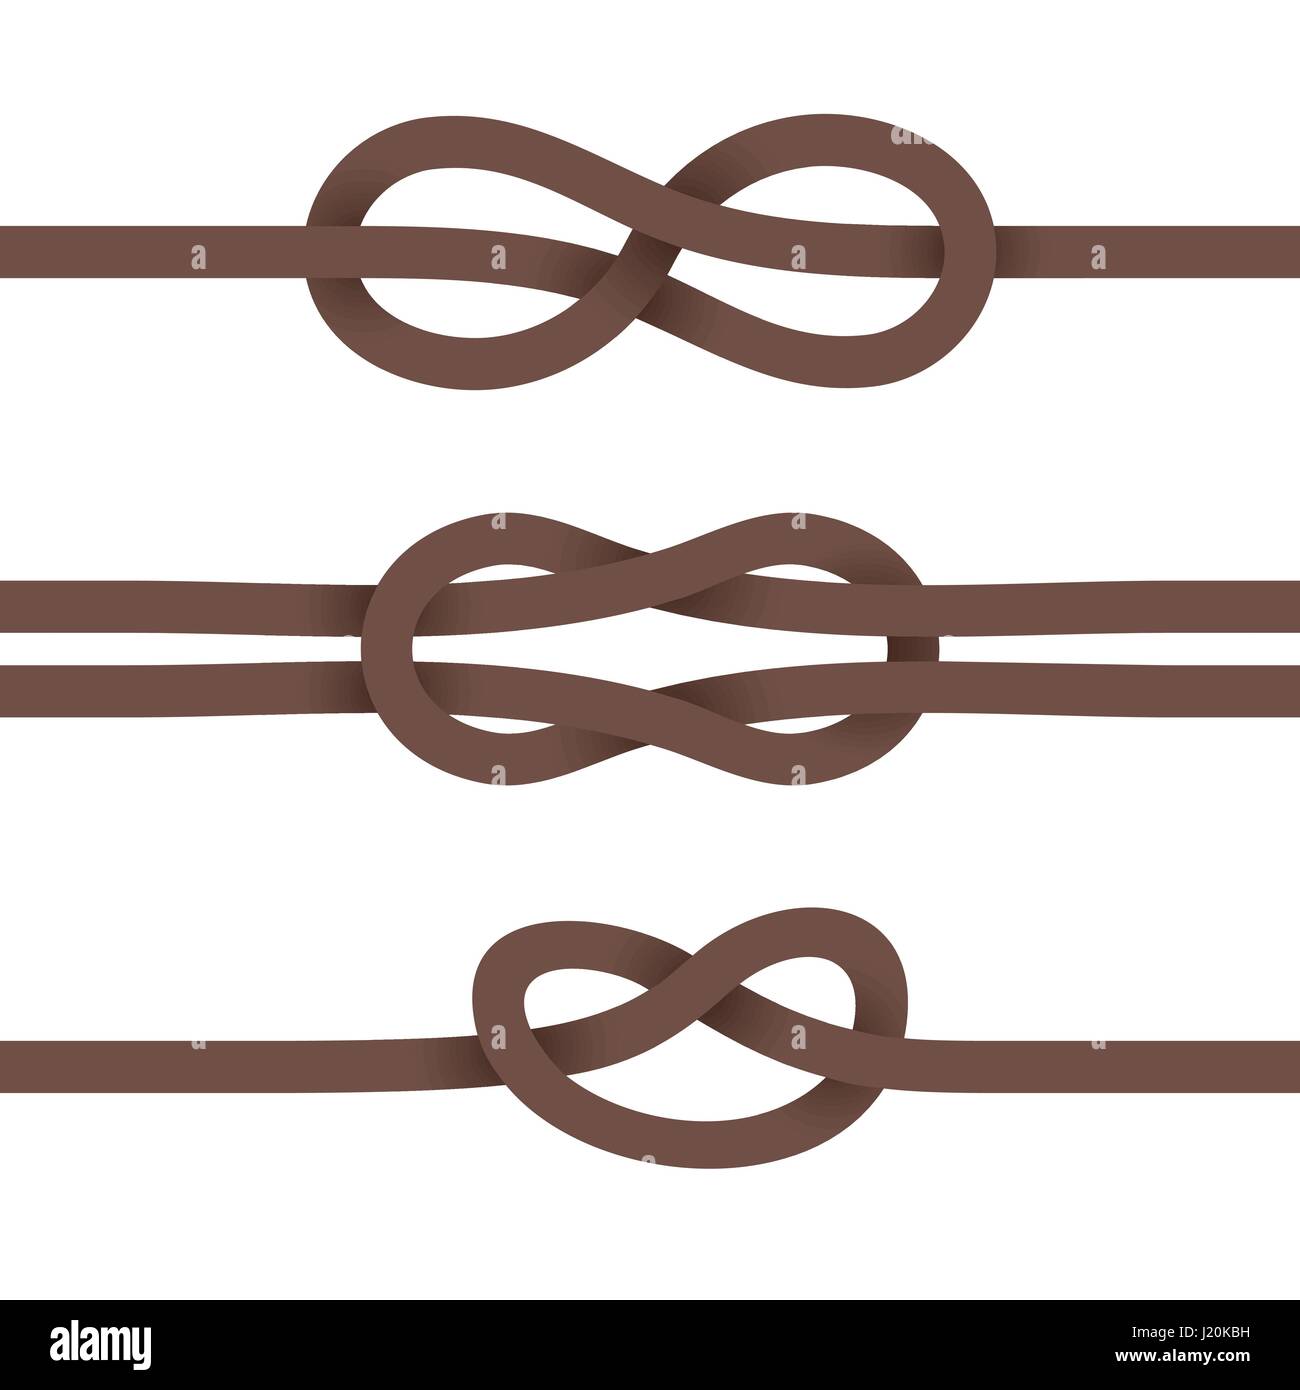 Tapes are tied in knots Stock Vector